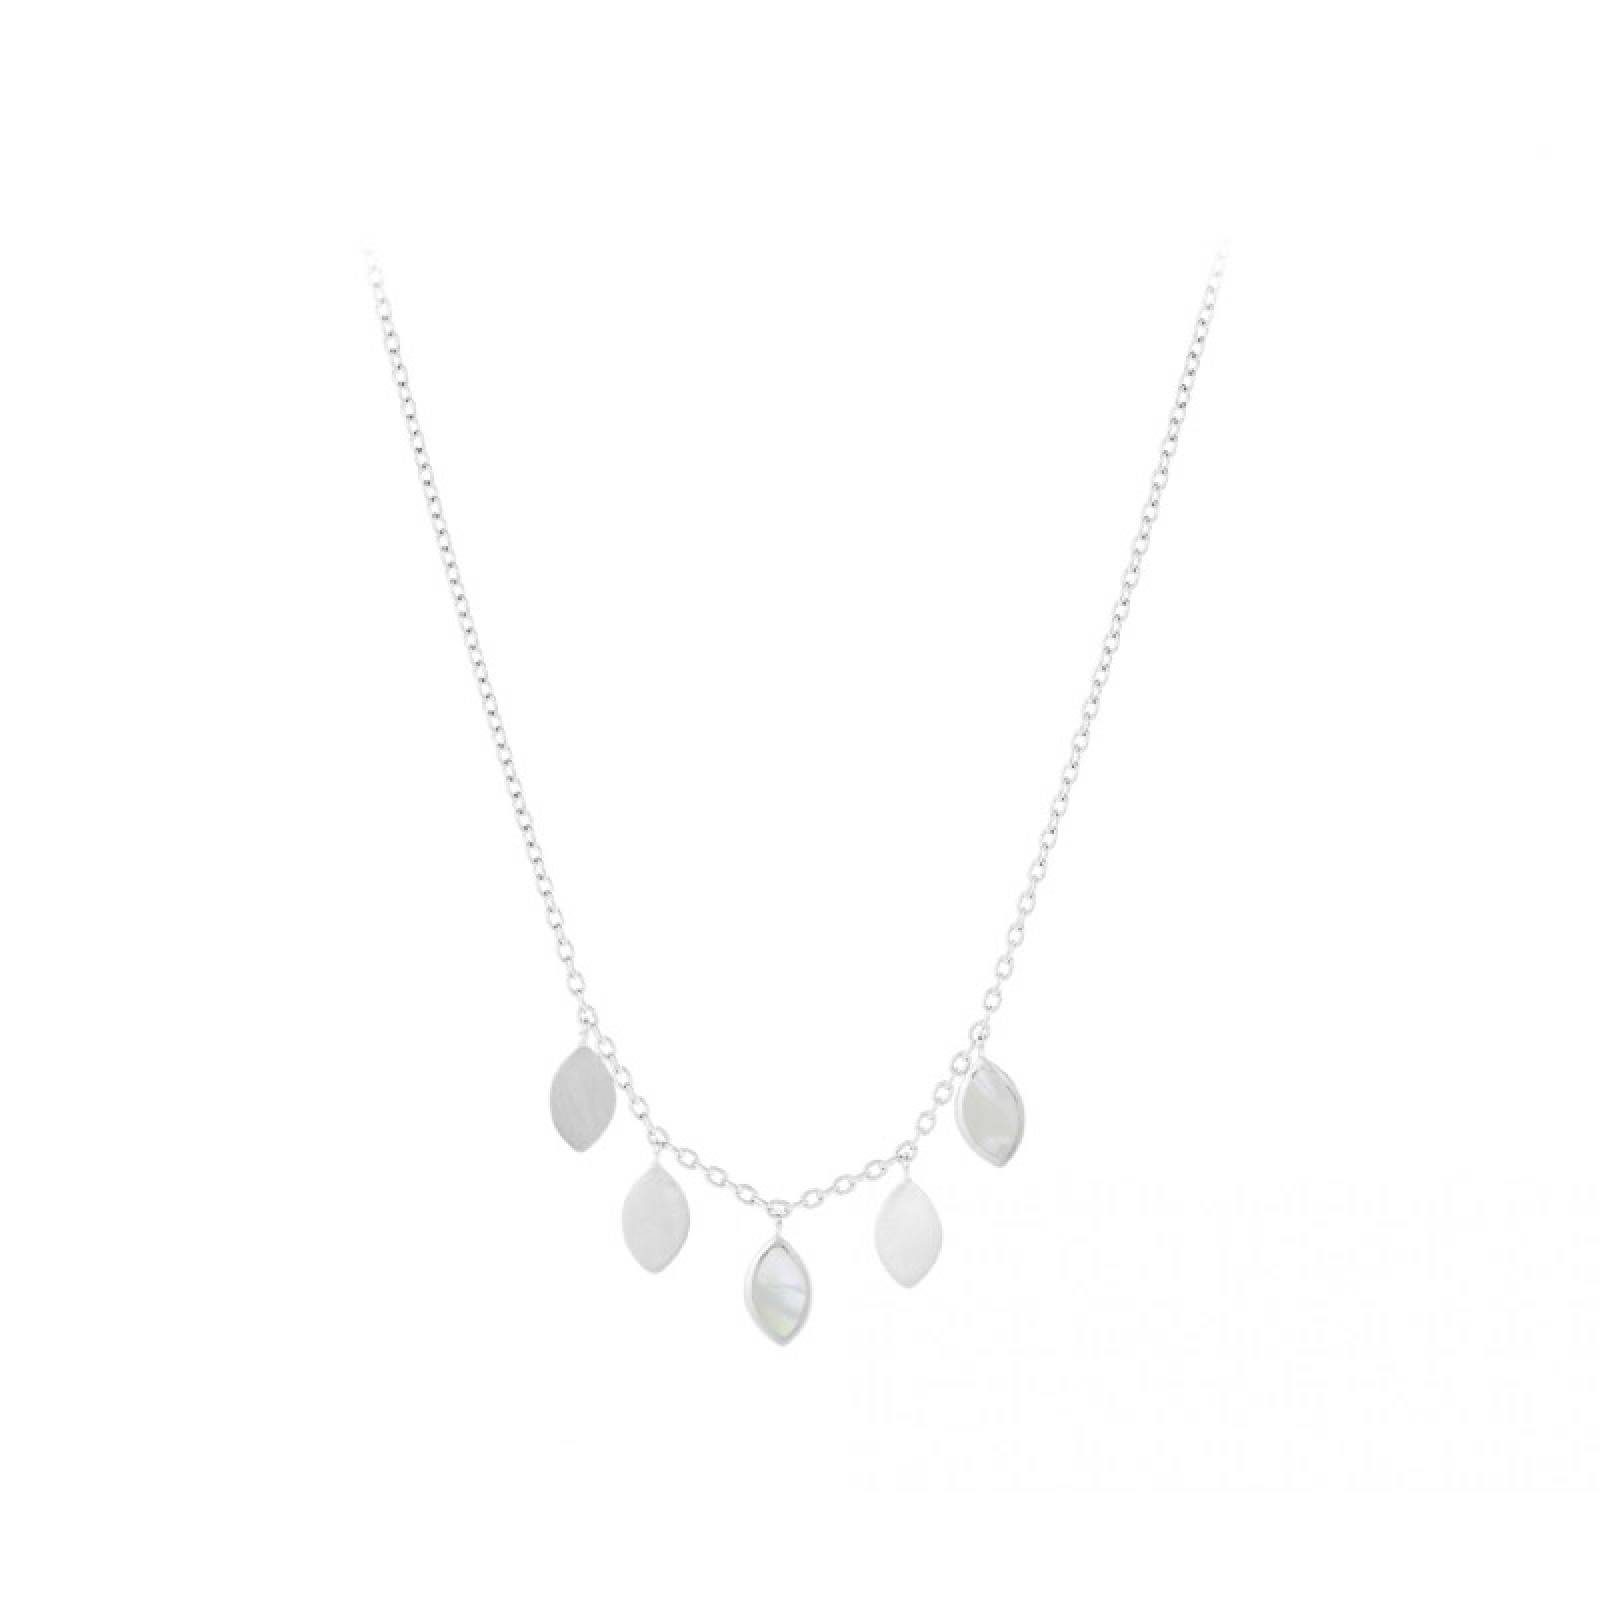 Flake Necklace In Silver By Pernille Corydon